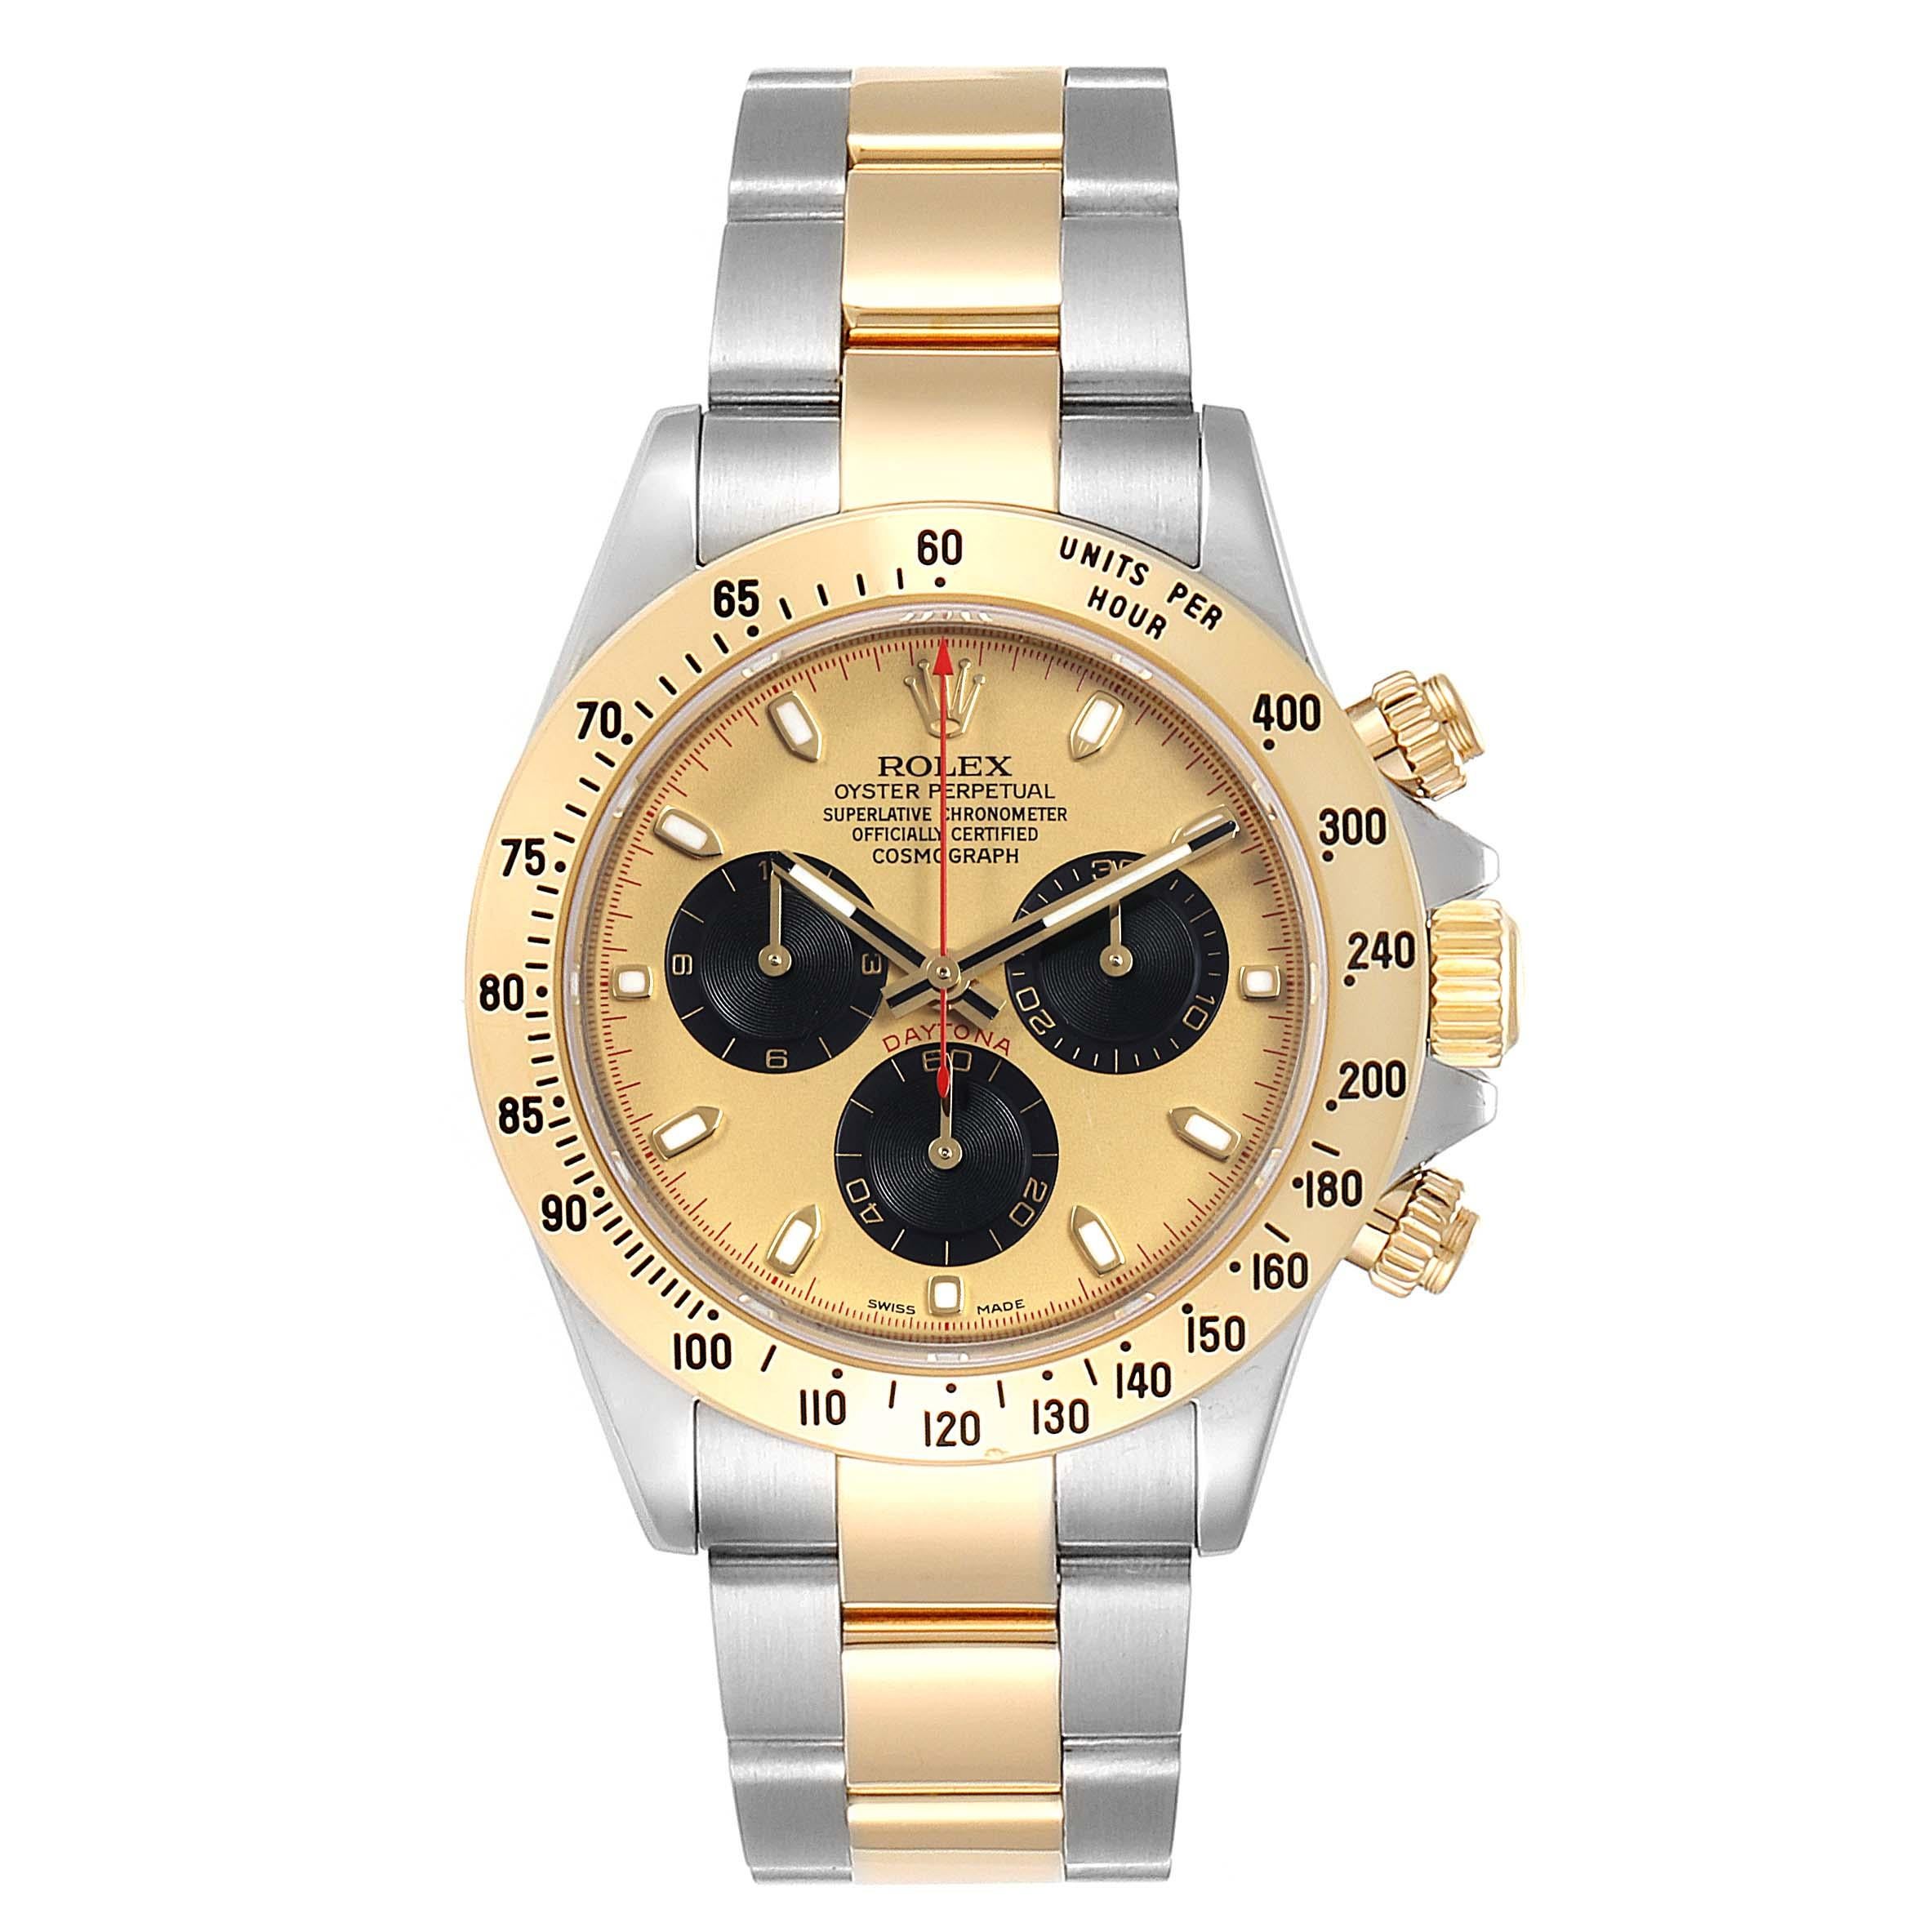 Rolex Daytona Paul Newman Dial Steel Yellow Gold Mens Watch 116523. Officially certified chronometer self-winding movement. Rhodium-plated, oeil-de-perdrix decoration, straight line lever escapement, monometallic balance adjusted to 5 positions,